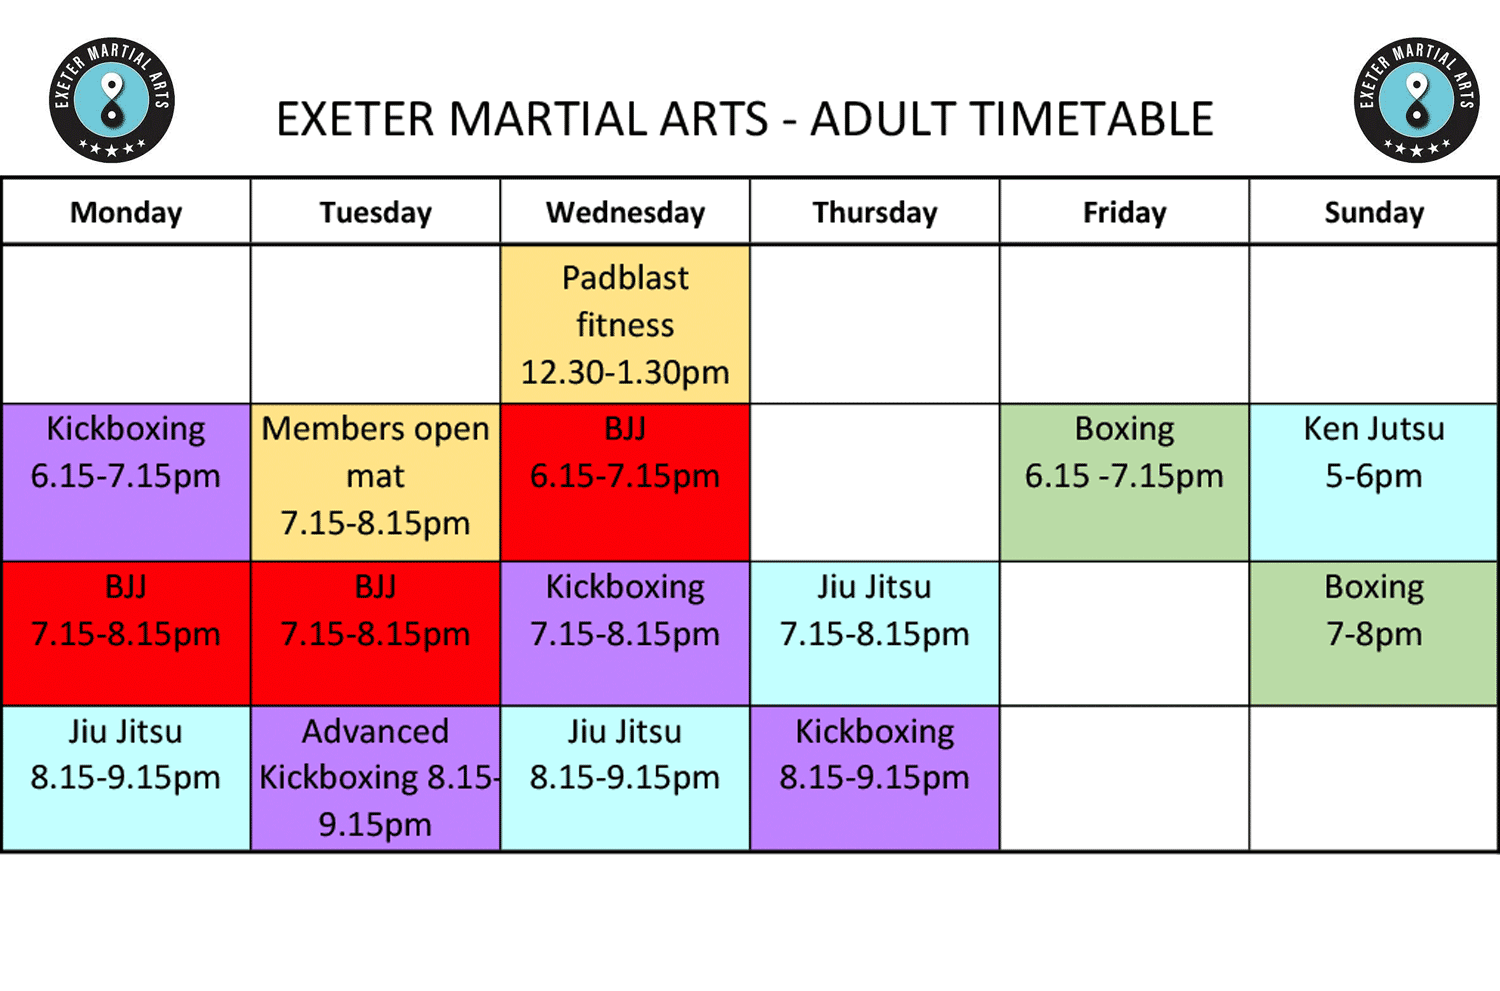 Exeter Martial Arts Adult Timetable